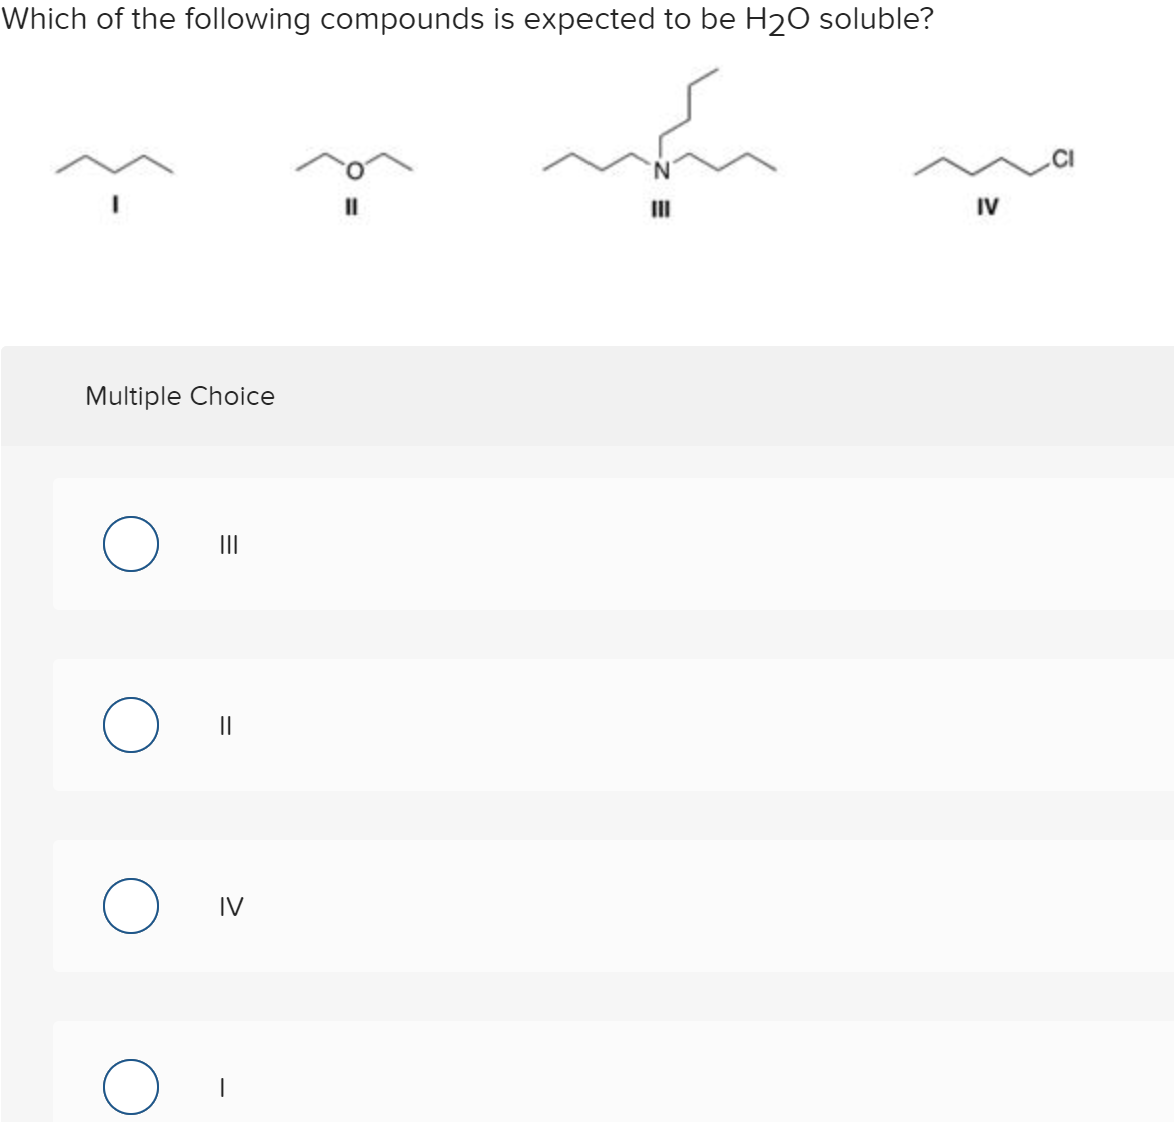 Which of the following compounds is expected to be H20 soluble?
II
IV
Multiple Choice
II
II
IV
